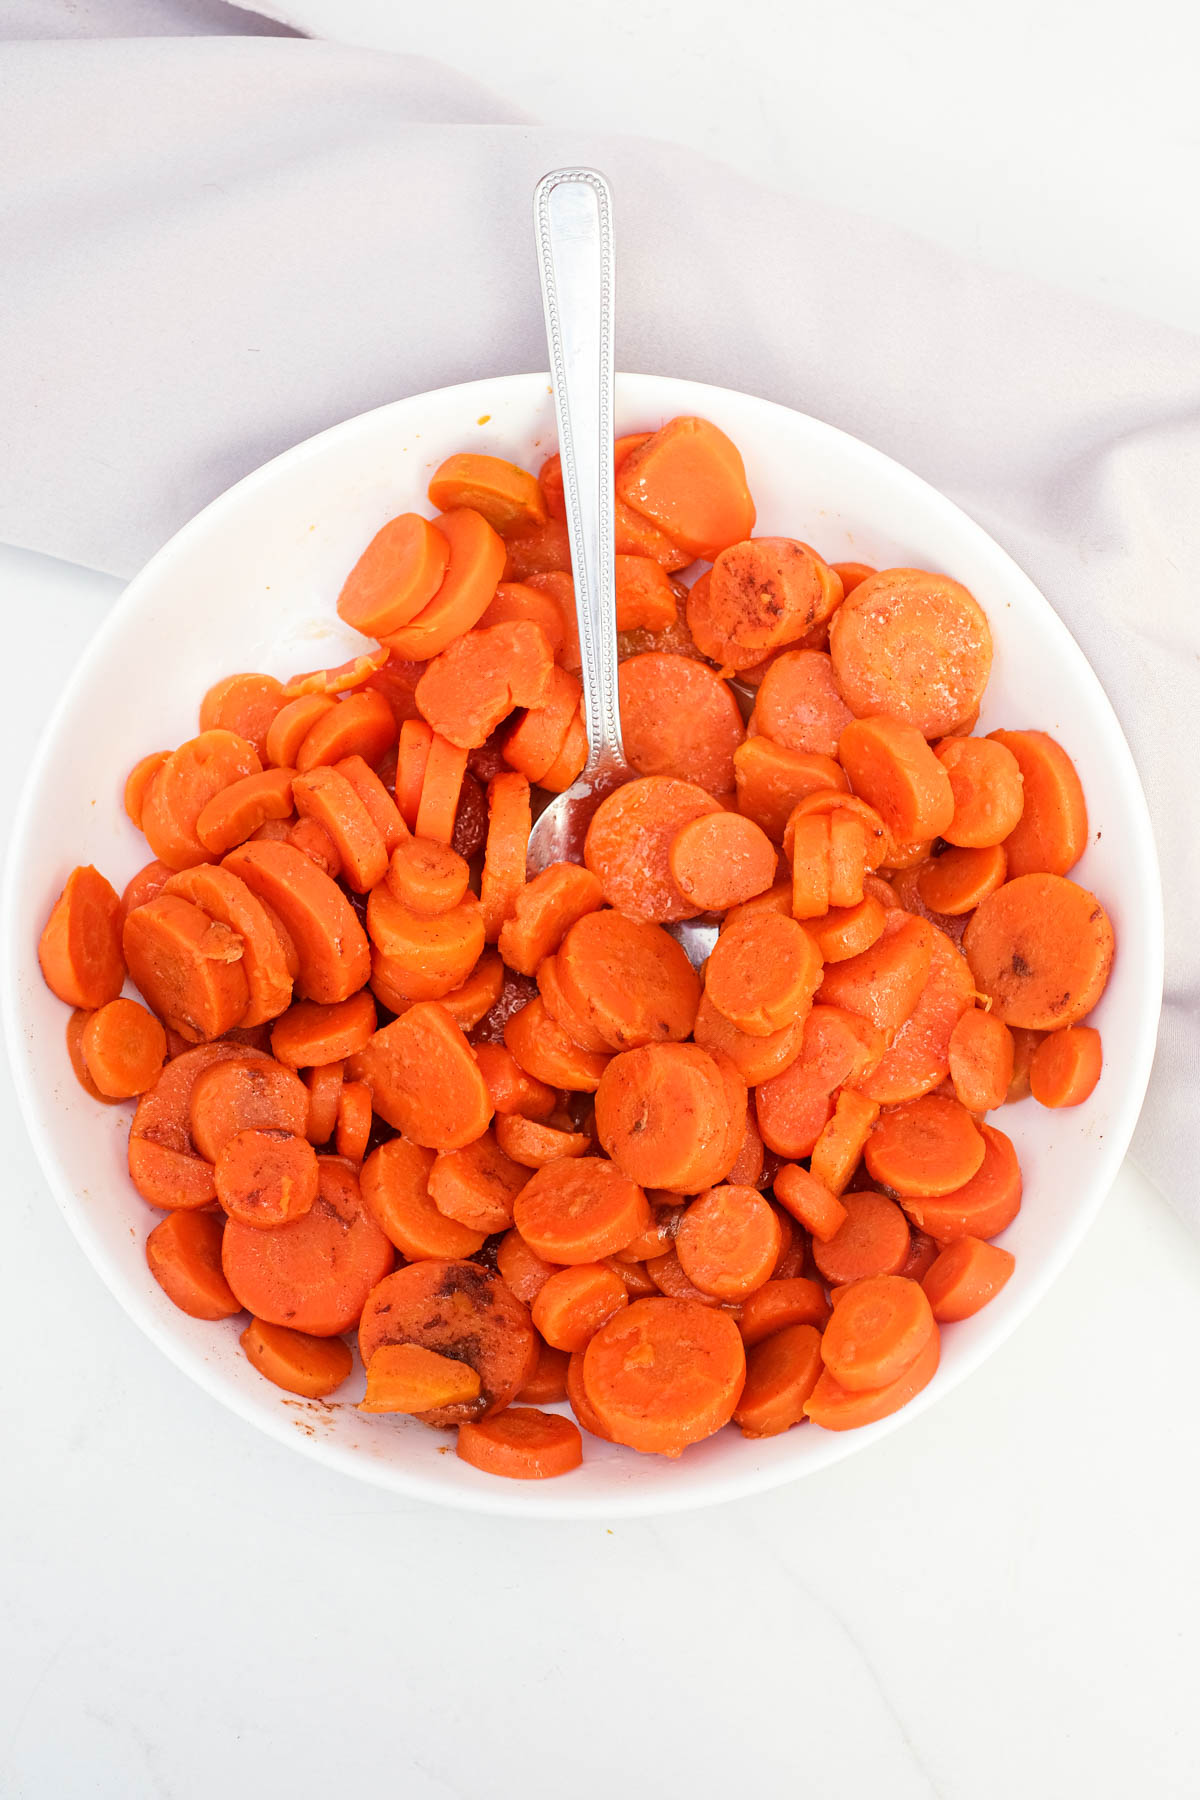 a serving spoon inside a bowl filled with the finished how to cook canned carrots recipe